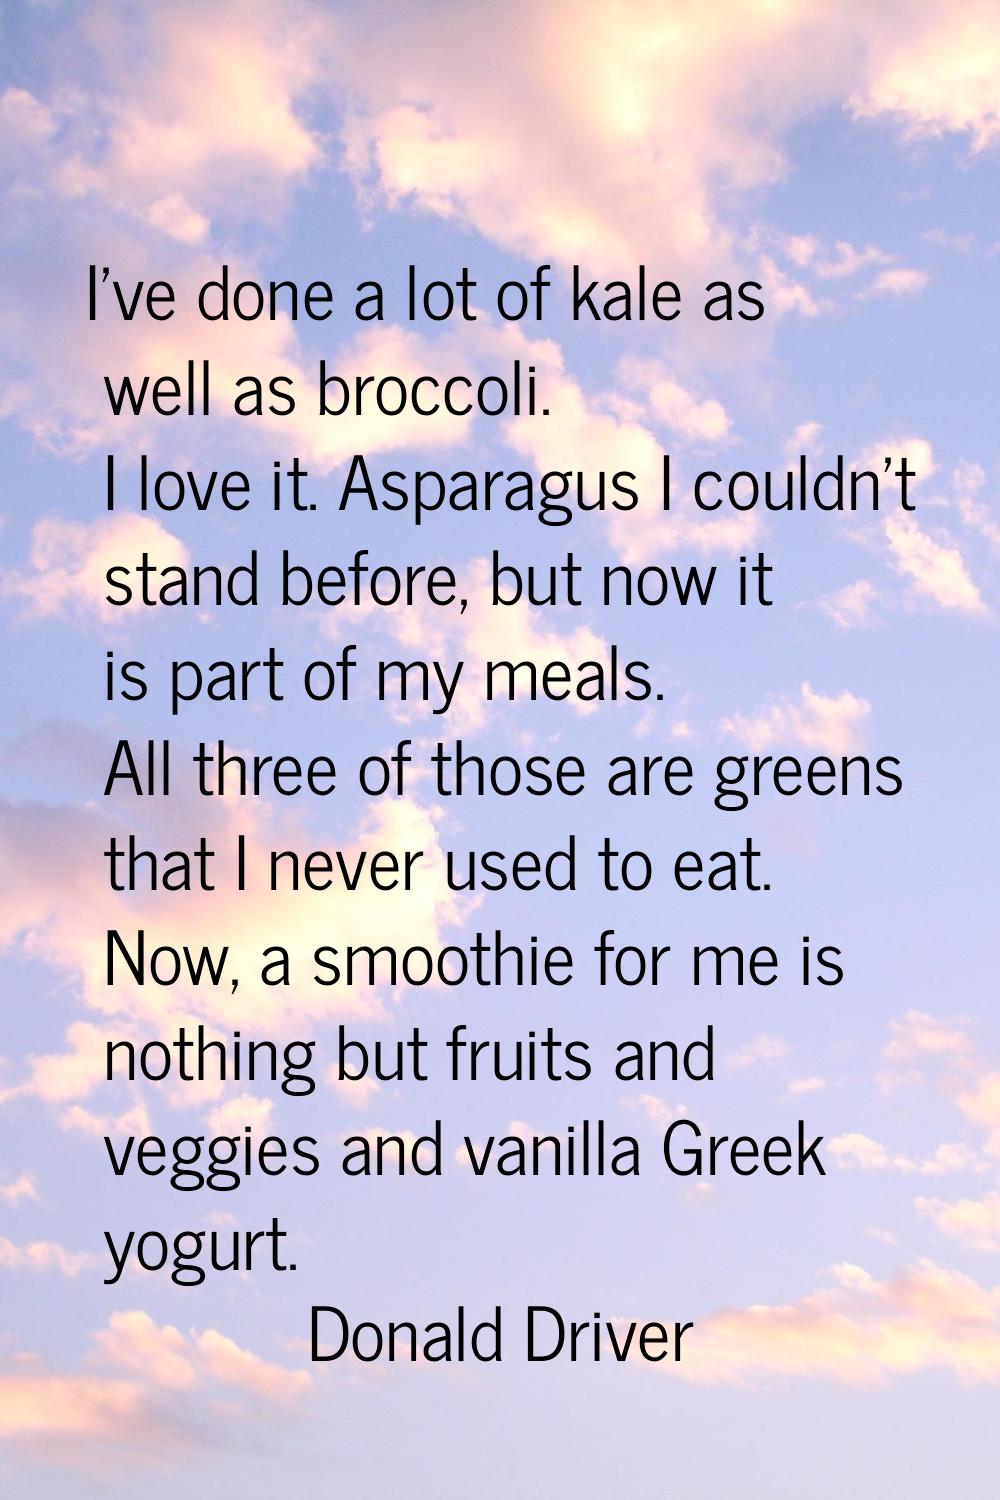 I've done a lot of kale as well as broccoli. I love it. Asparagus I couldn't stand before, but now 